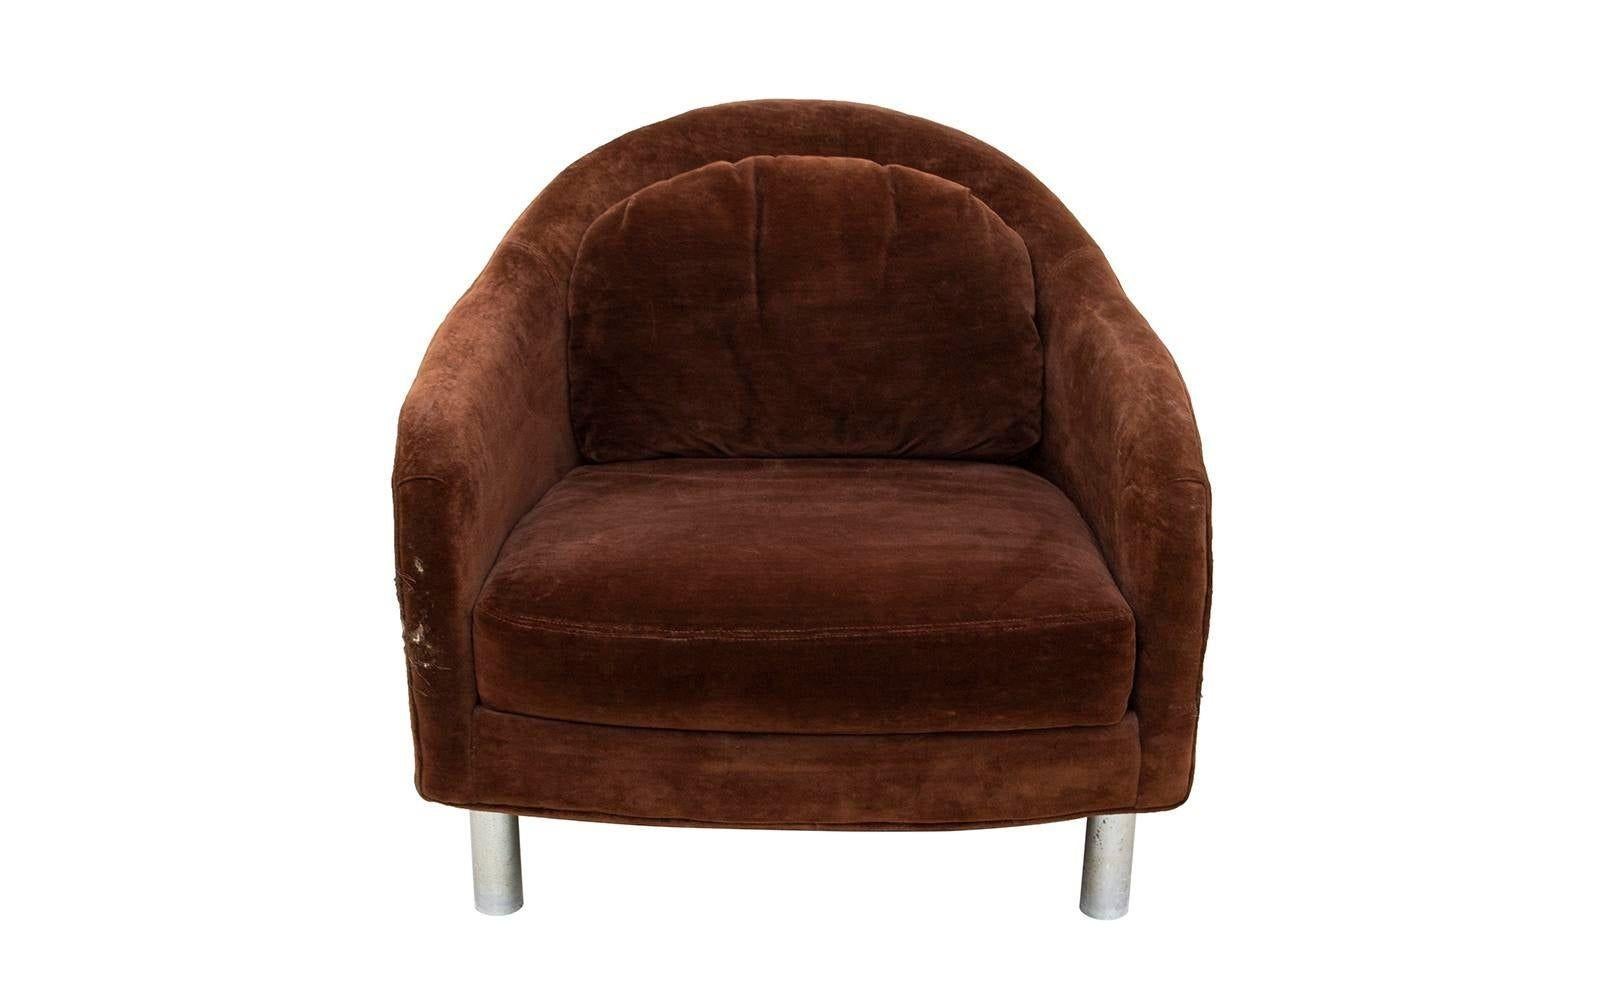 USA, 1970s
Velvety Brown Barrel Chair by Selig. Cylindrical silver feet, curves that look great from all angles, smaller scale. A very comfortable chair with a lot of personality. Smaller scale design with a lower seat height that would be great